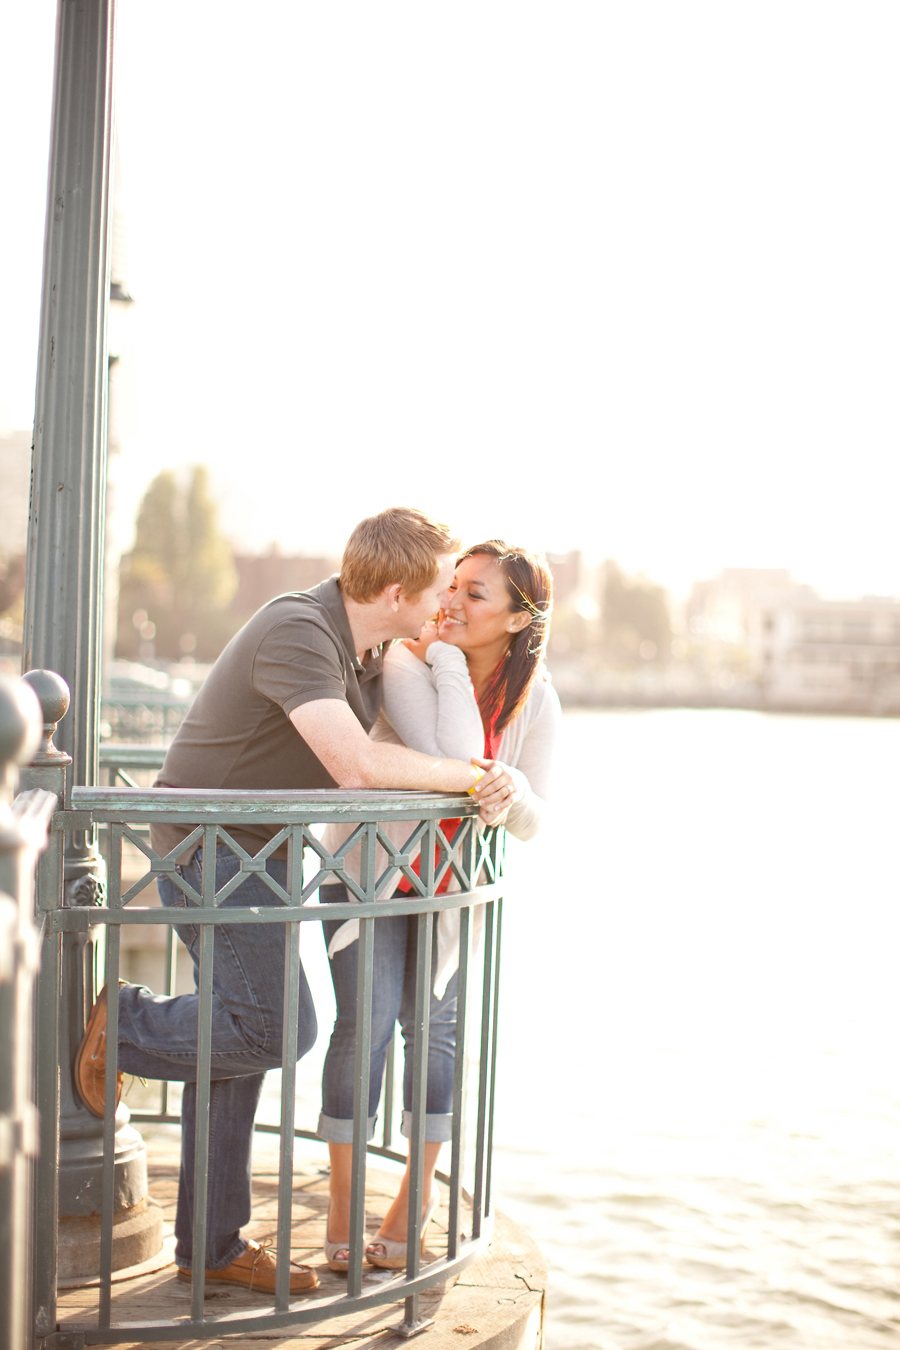 The couple lean on the pier railing looking at each other.